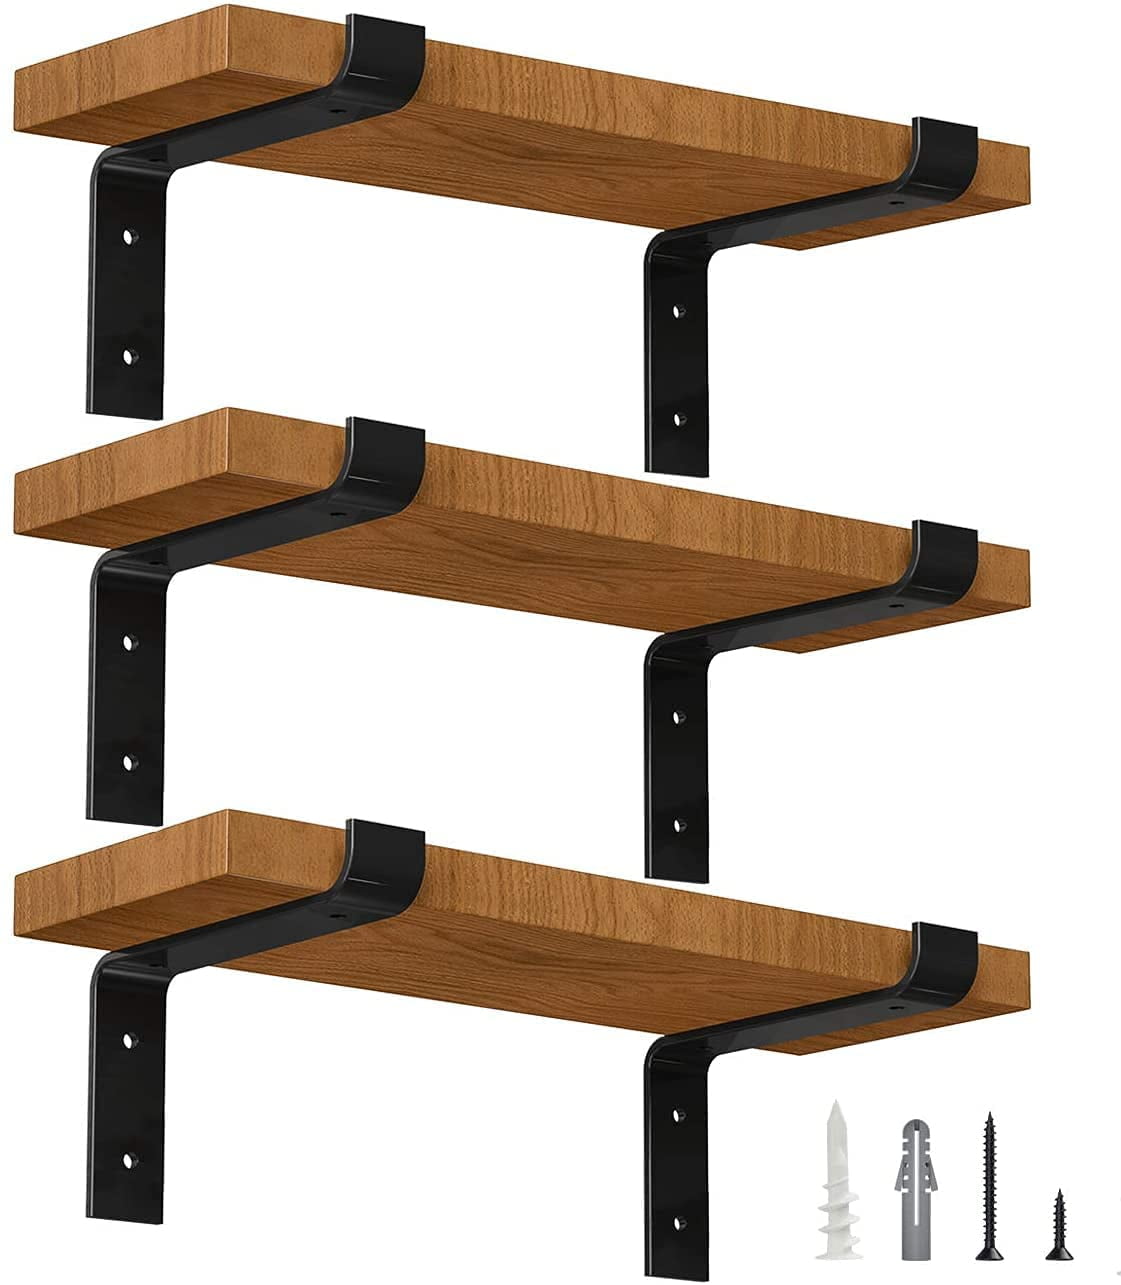 Details about   Garage Shelf Brackets Heavy Duty Metal Floating Storage Wall Shelving Supports 